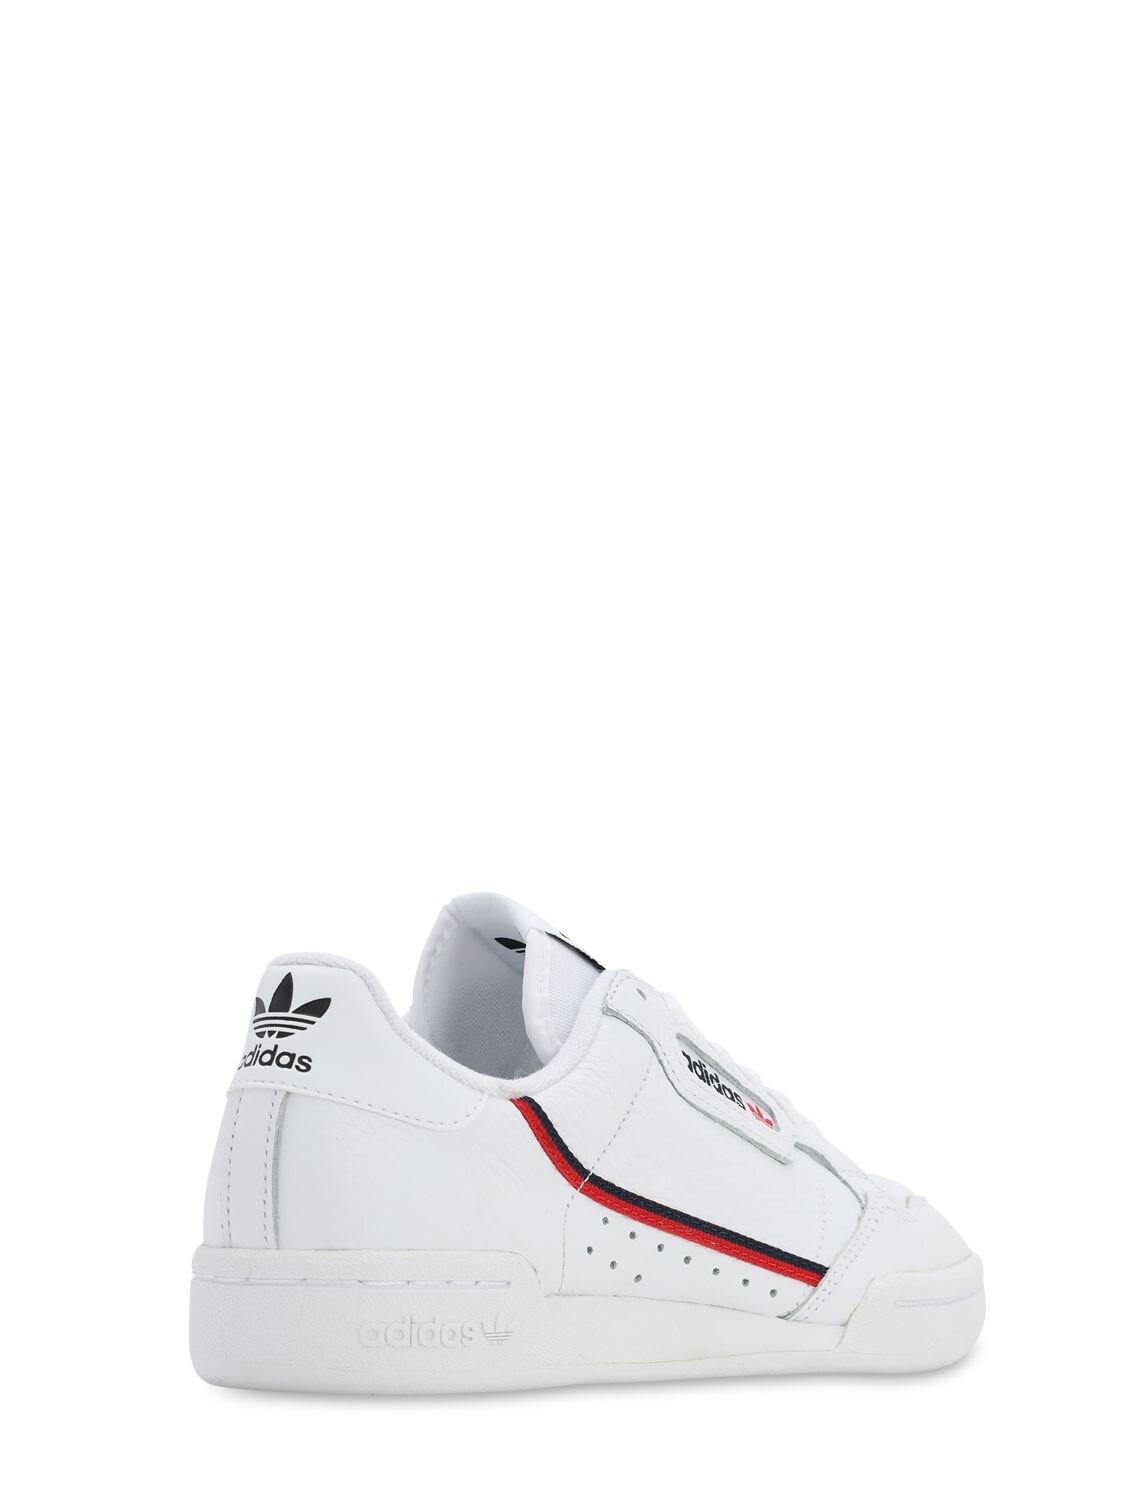 adidas Originals Rubber Continental 80 Trainers in White/Green (White) -  Save 29% - Lyst